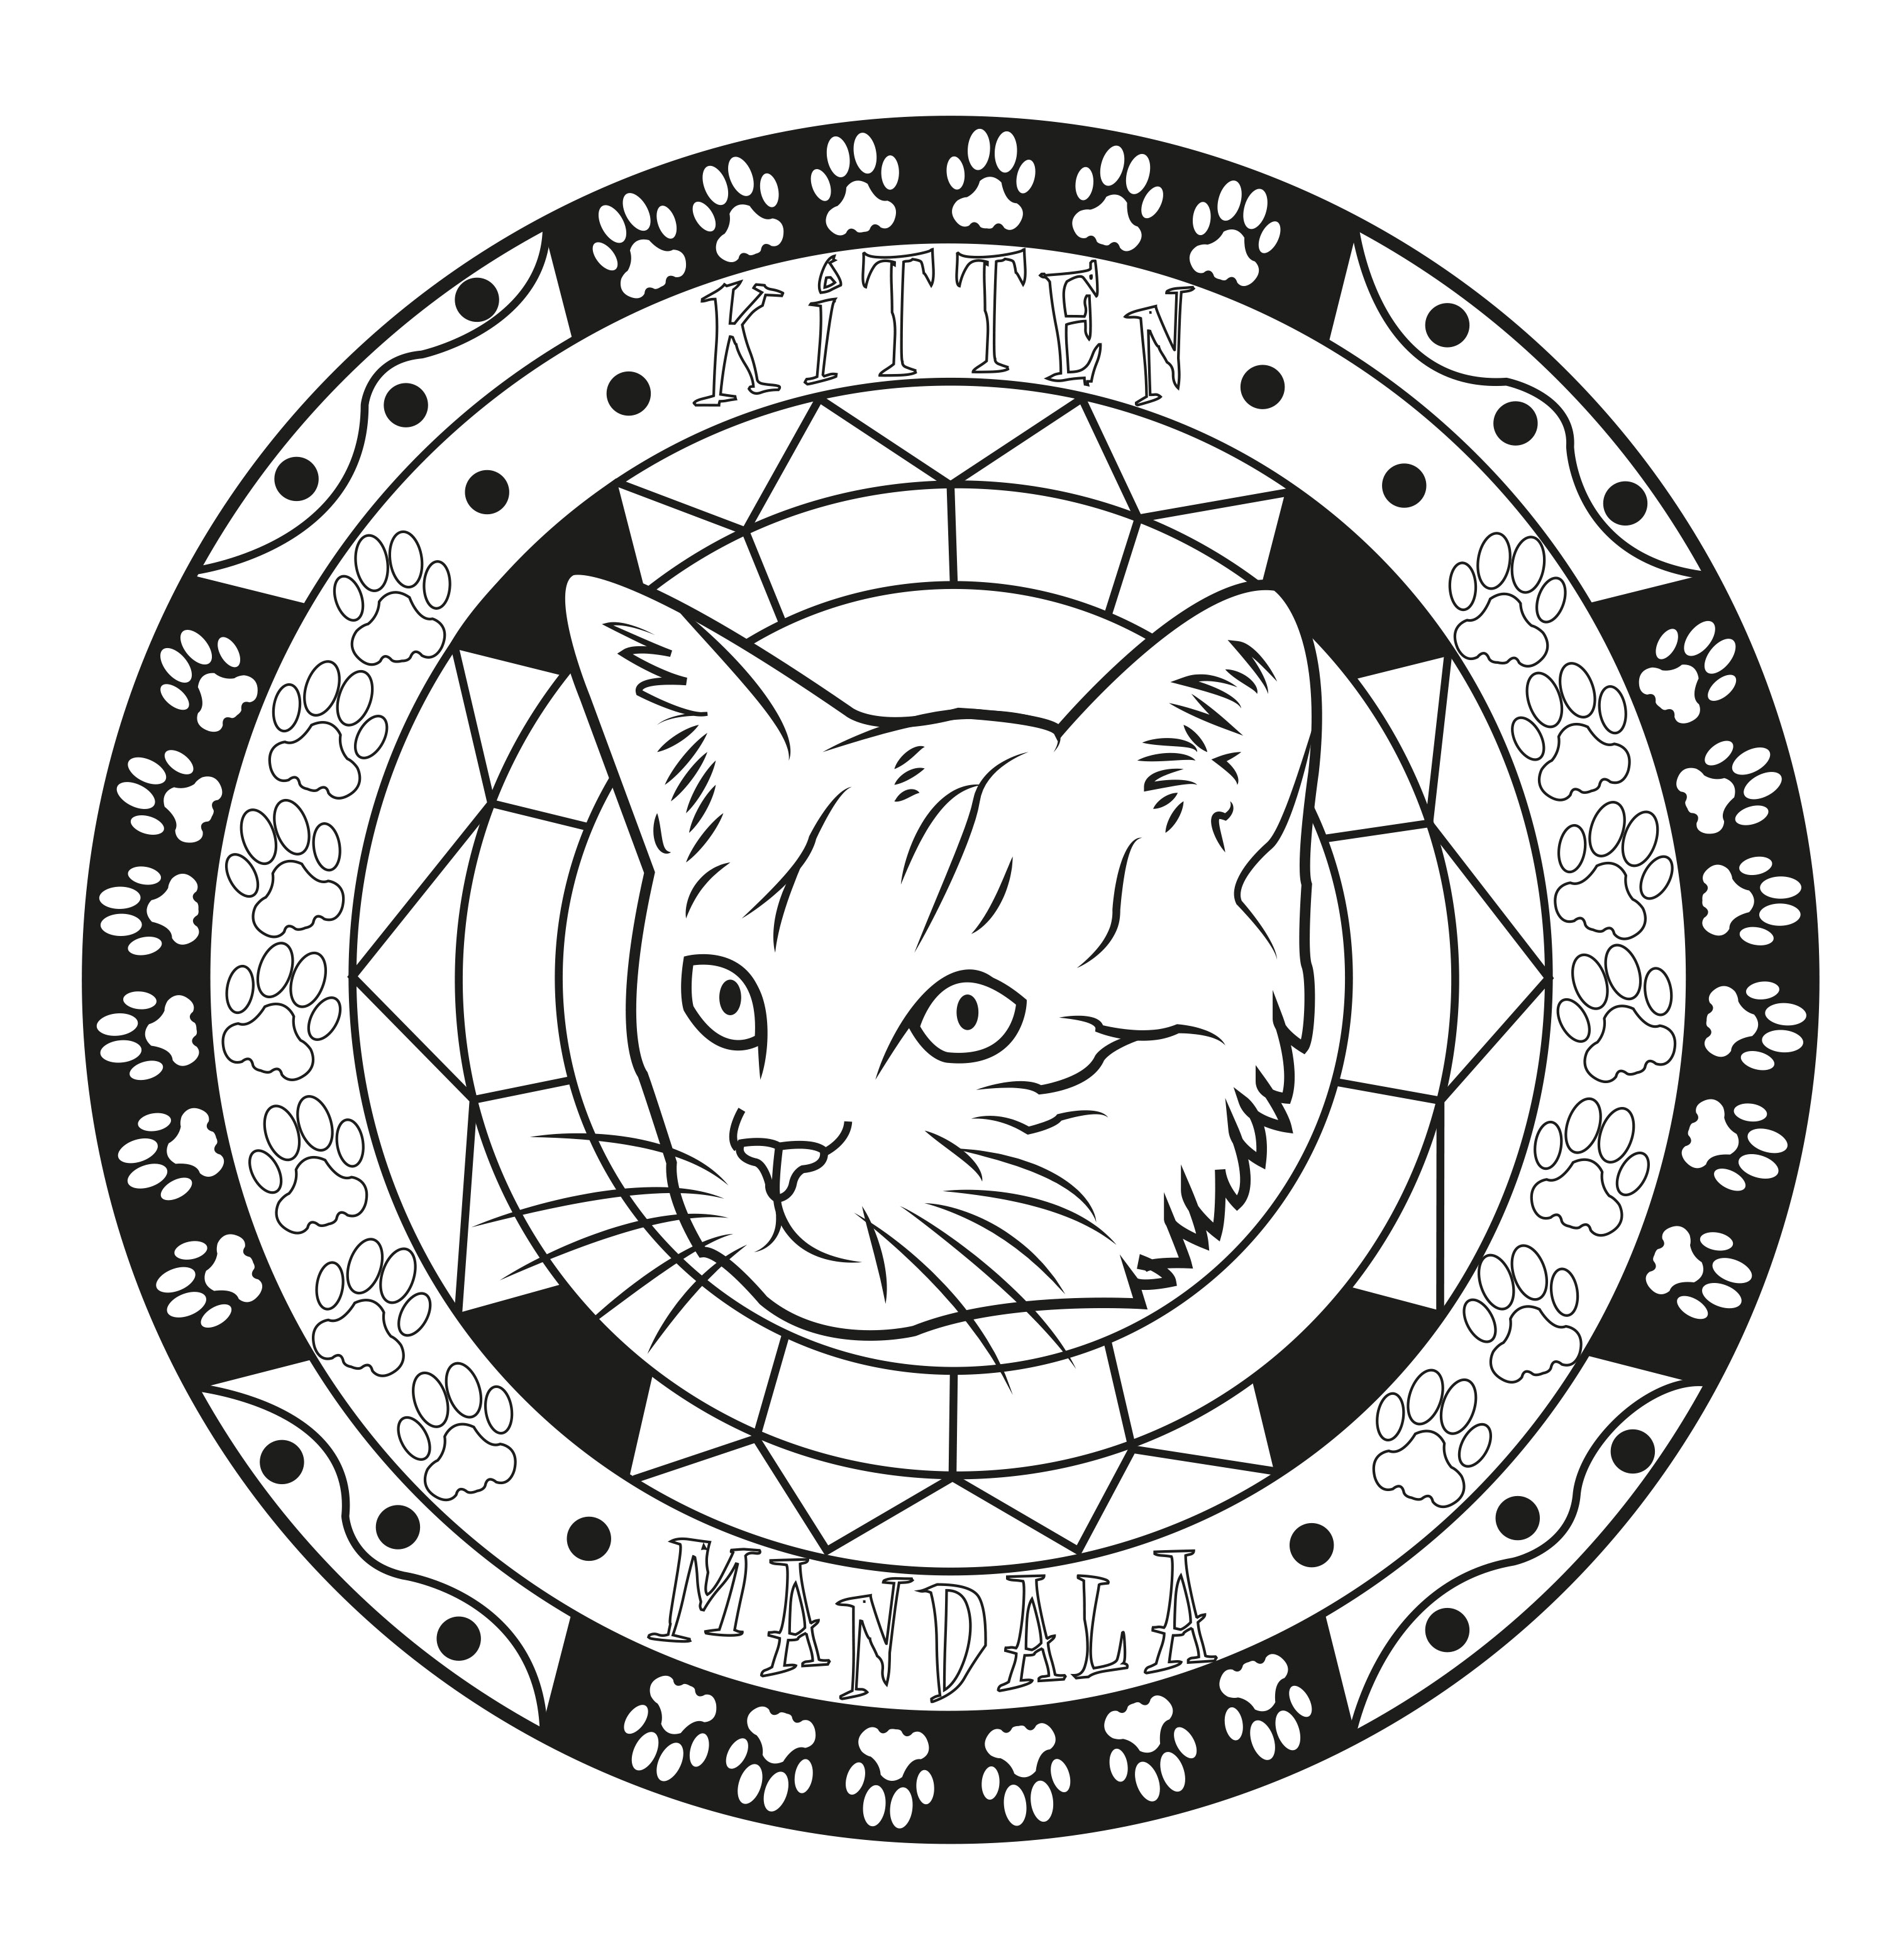 Free Mandalas coloring page to print and color